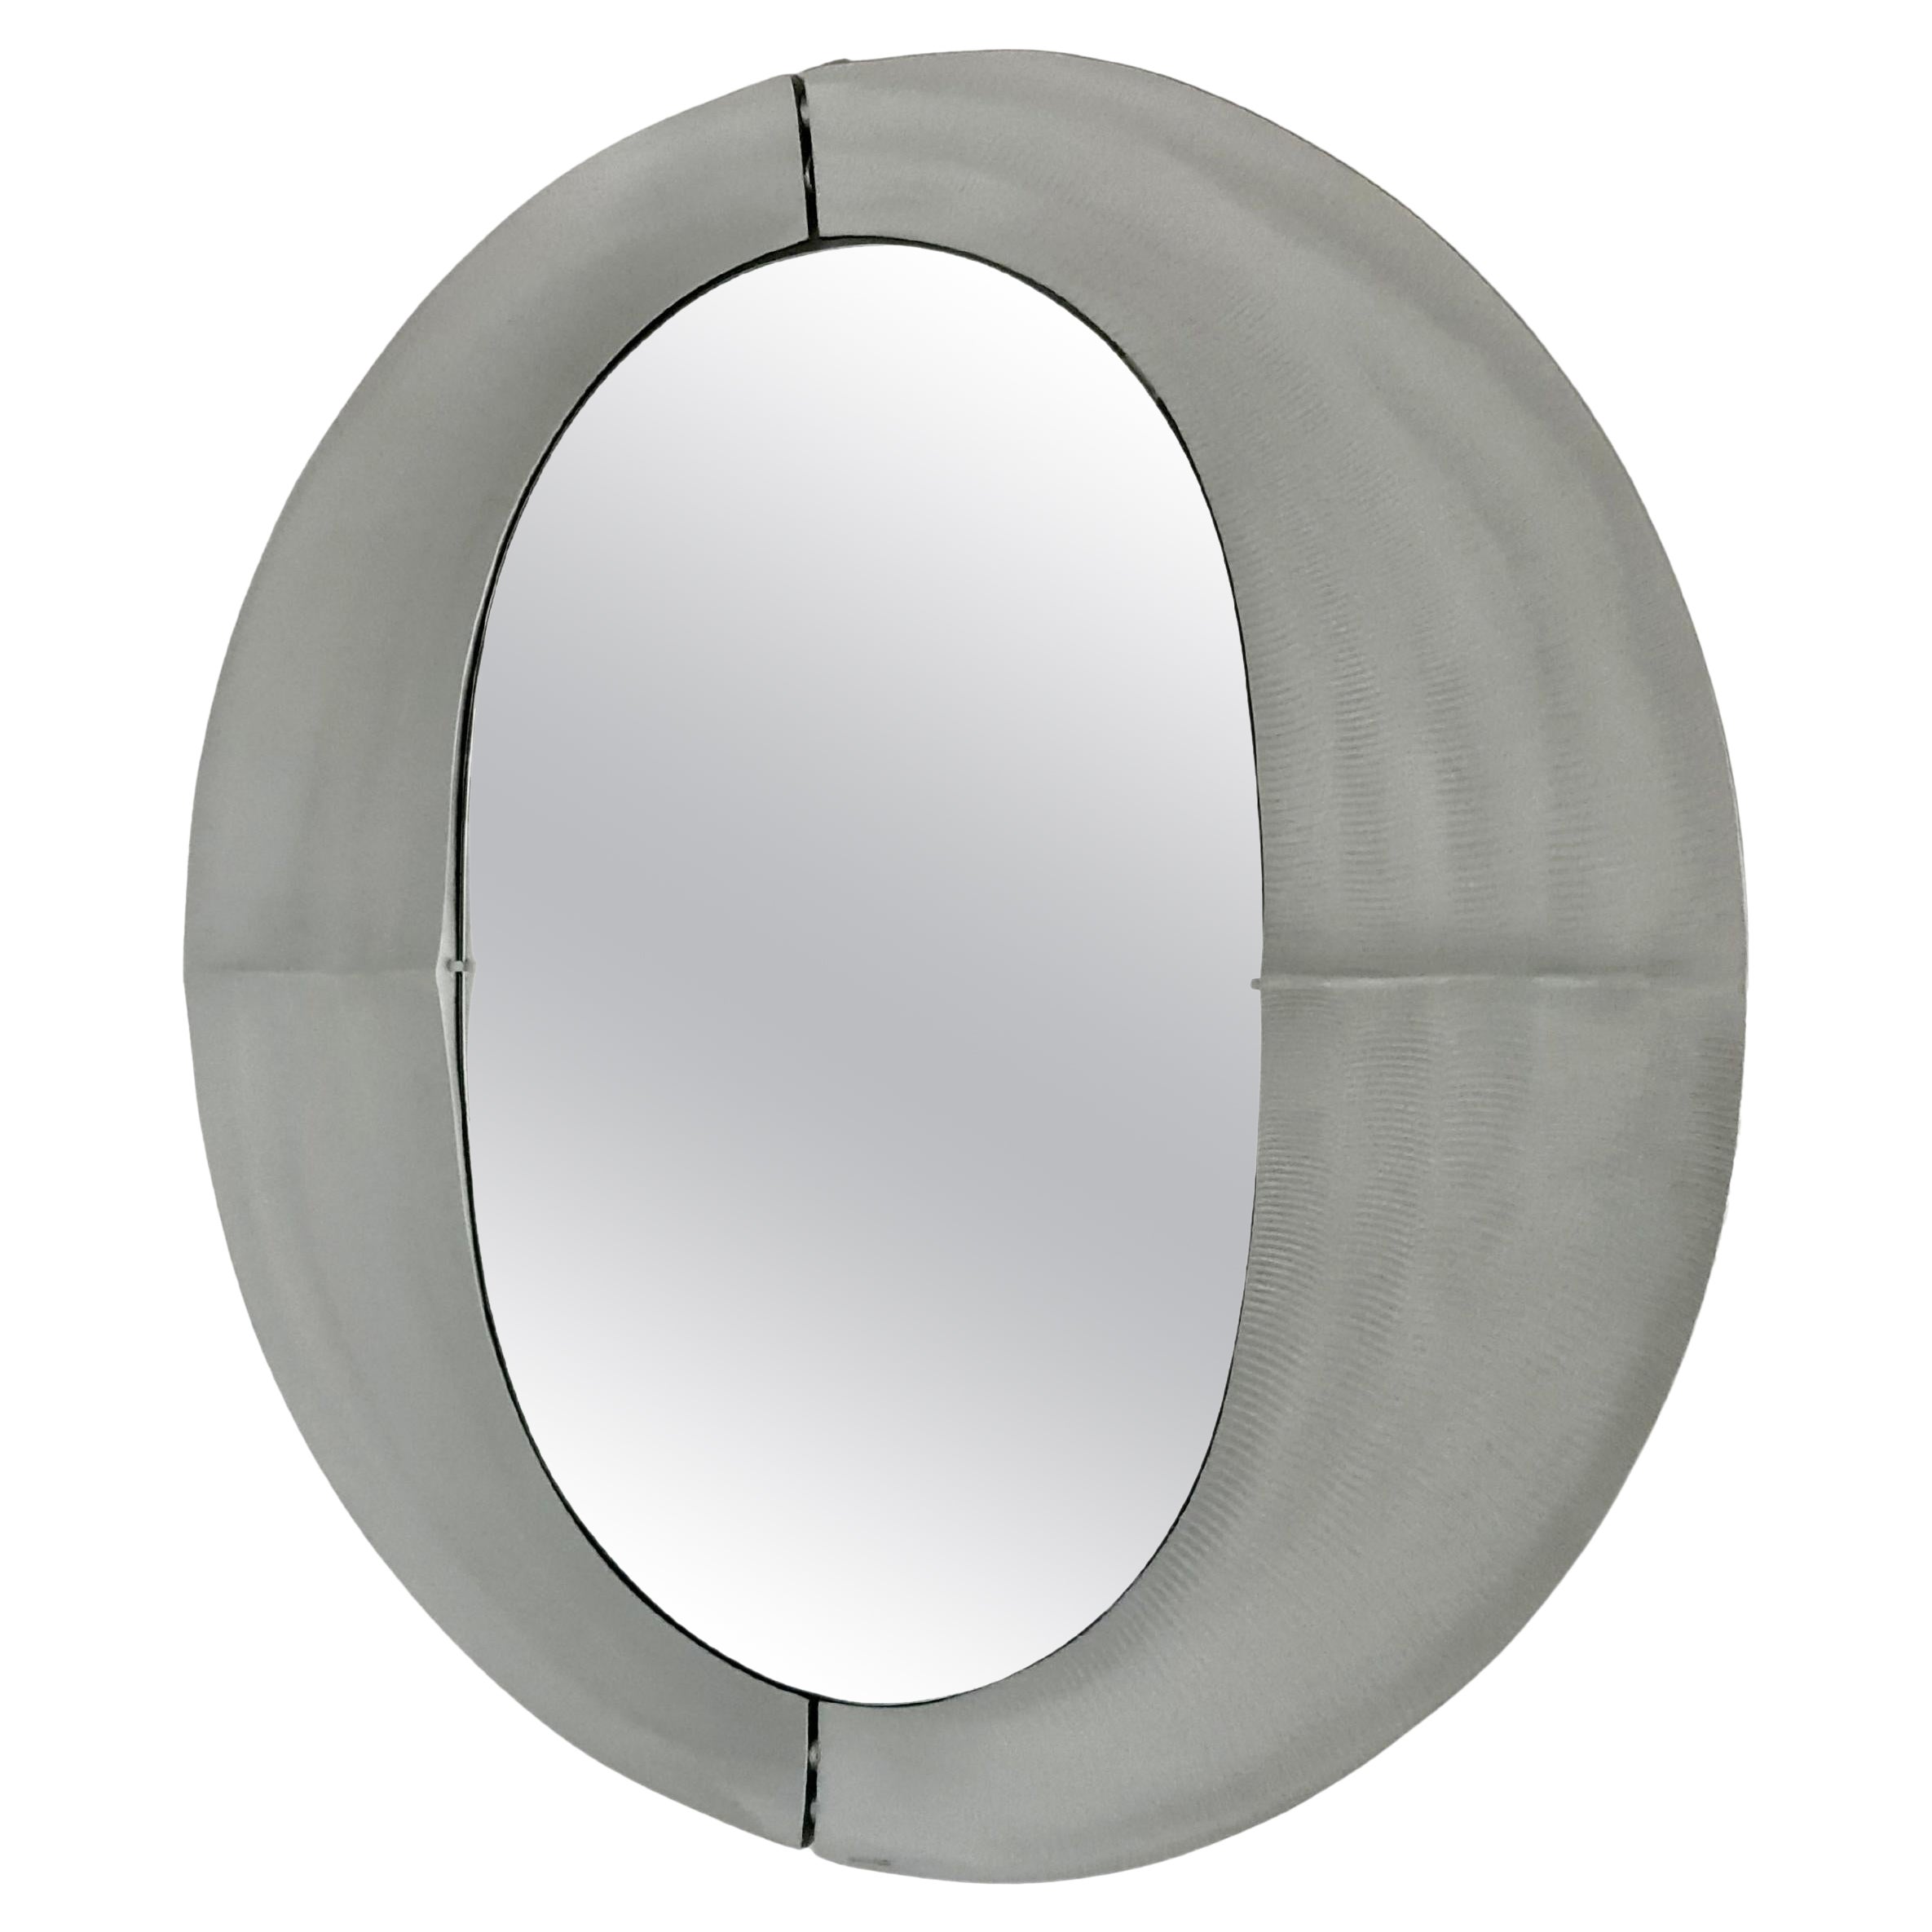 A sculptural modernist round mirror by artist Lorenzo Burchiellaro from the 1970s. Textured cast aluminum with a slightly concave shape. Signed on the bottom Burchiellaro.